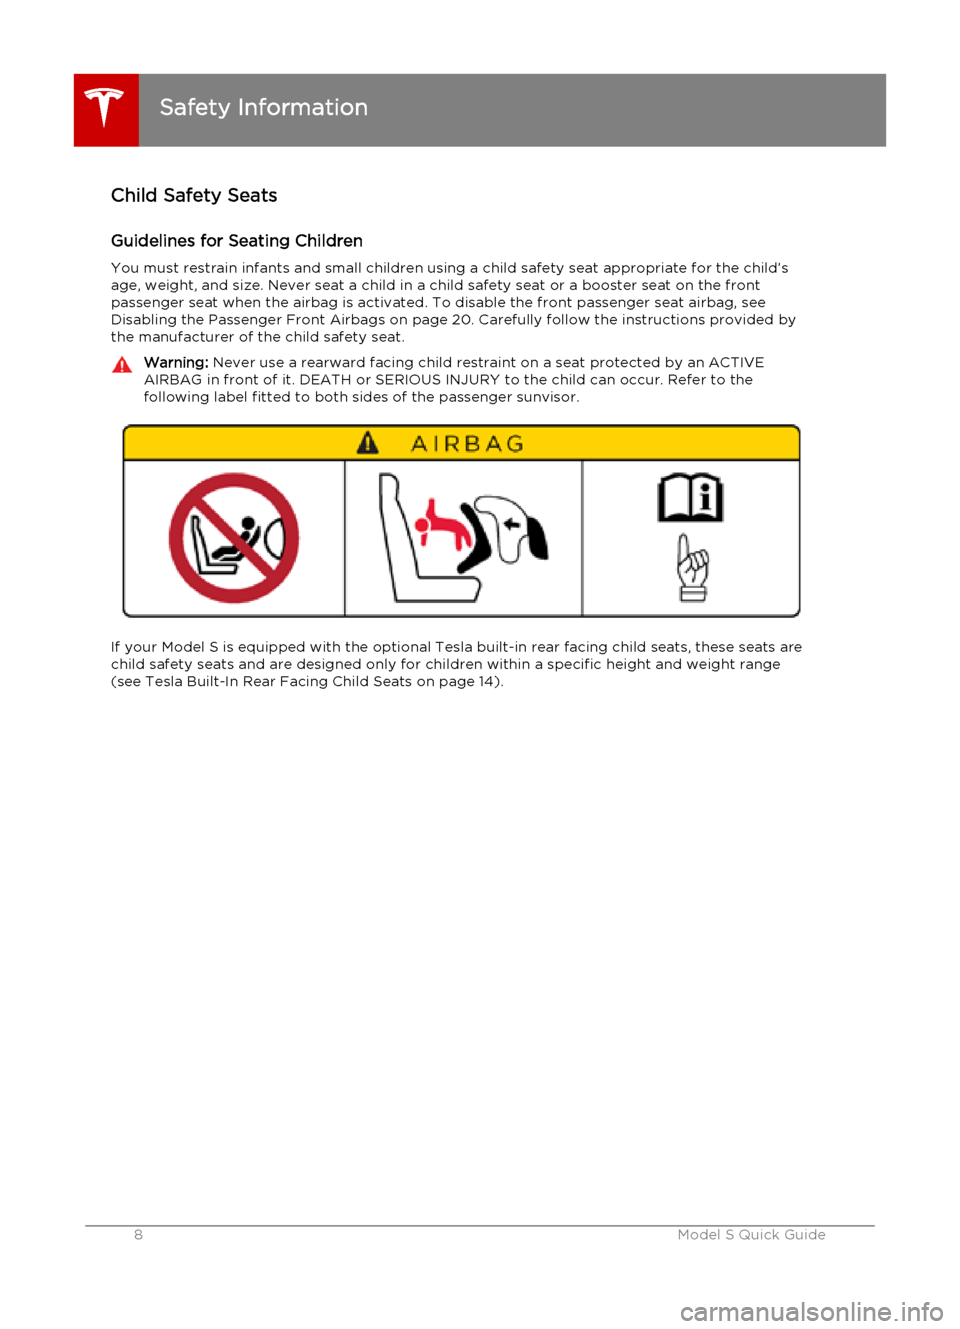 TESLA MODEL S 2015  クイックガイド (in Japanese) Child Safety SeatsGuidelines for Seating ChildrenYou must restrain infants and small children using a child safety seat appropriate for the child’sage, weight, and size. Never seat a child in a chil